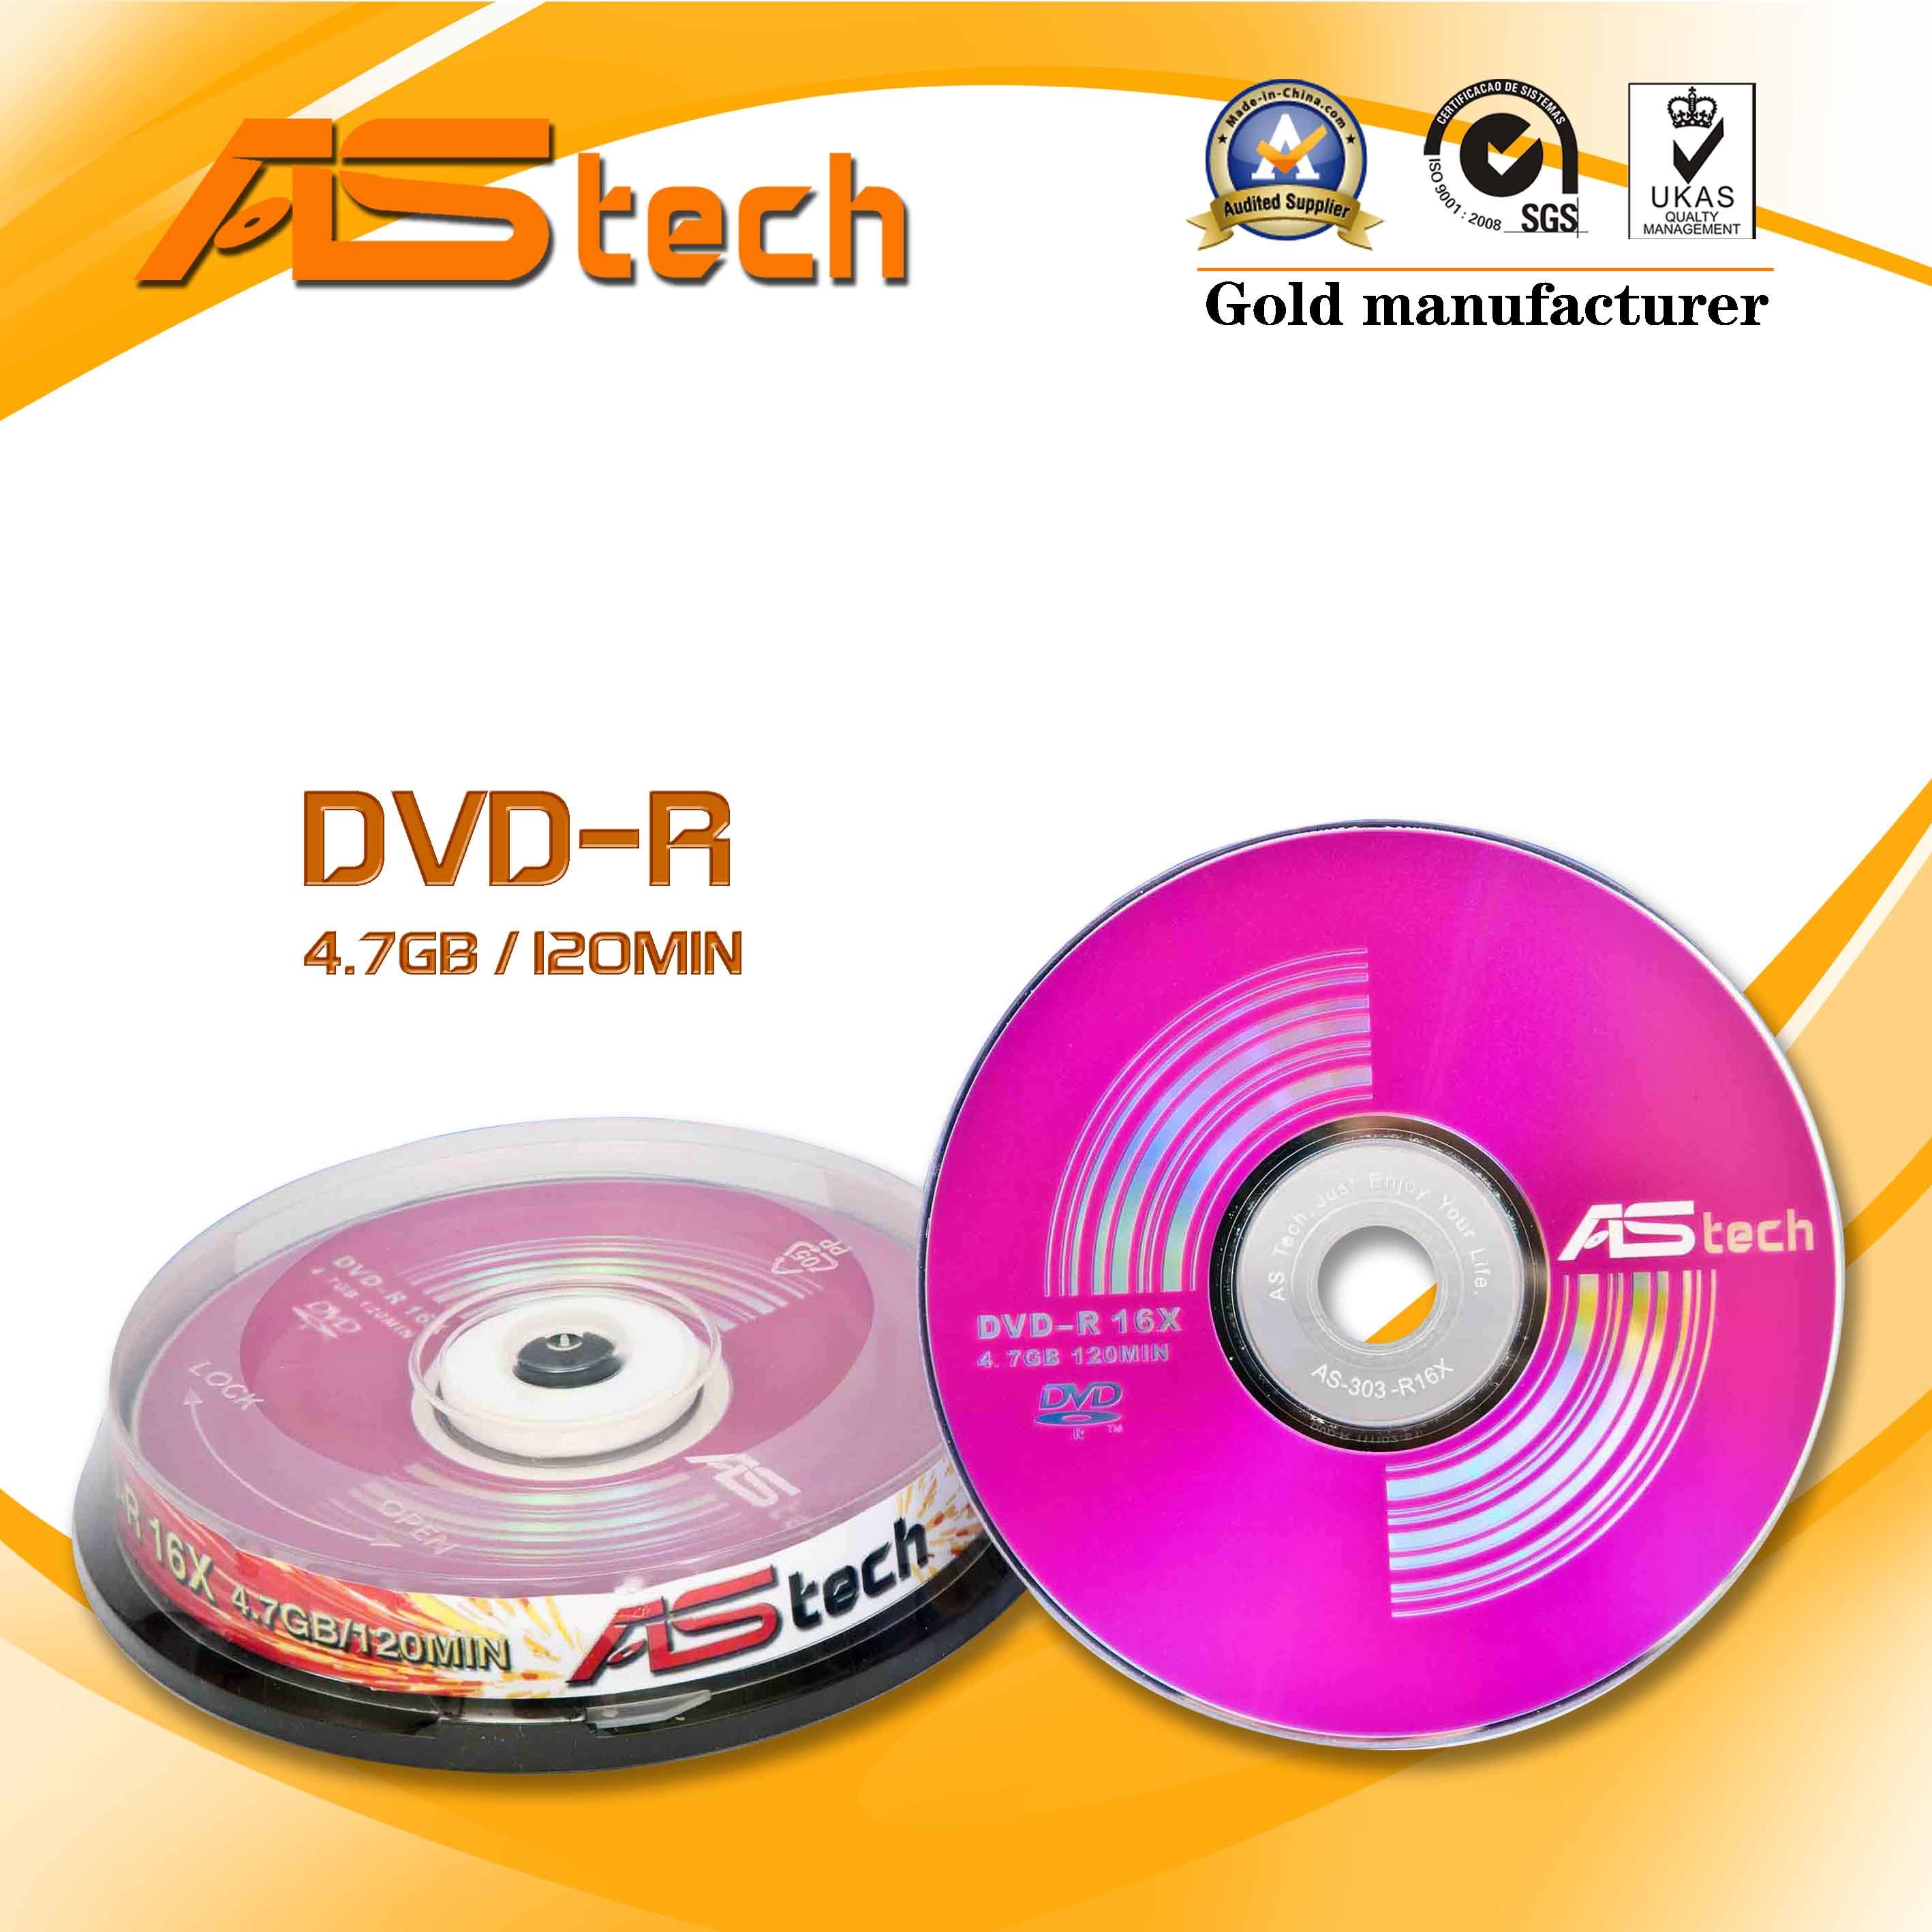 Printed DVD-R in Cake Box with Colour Label